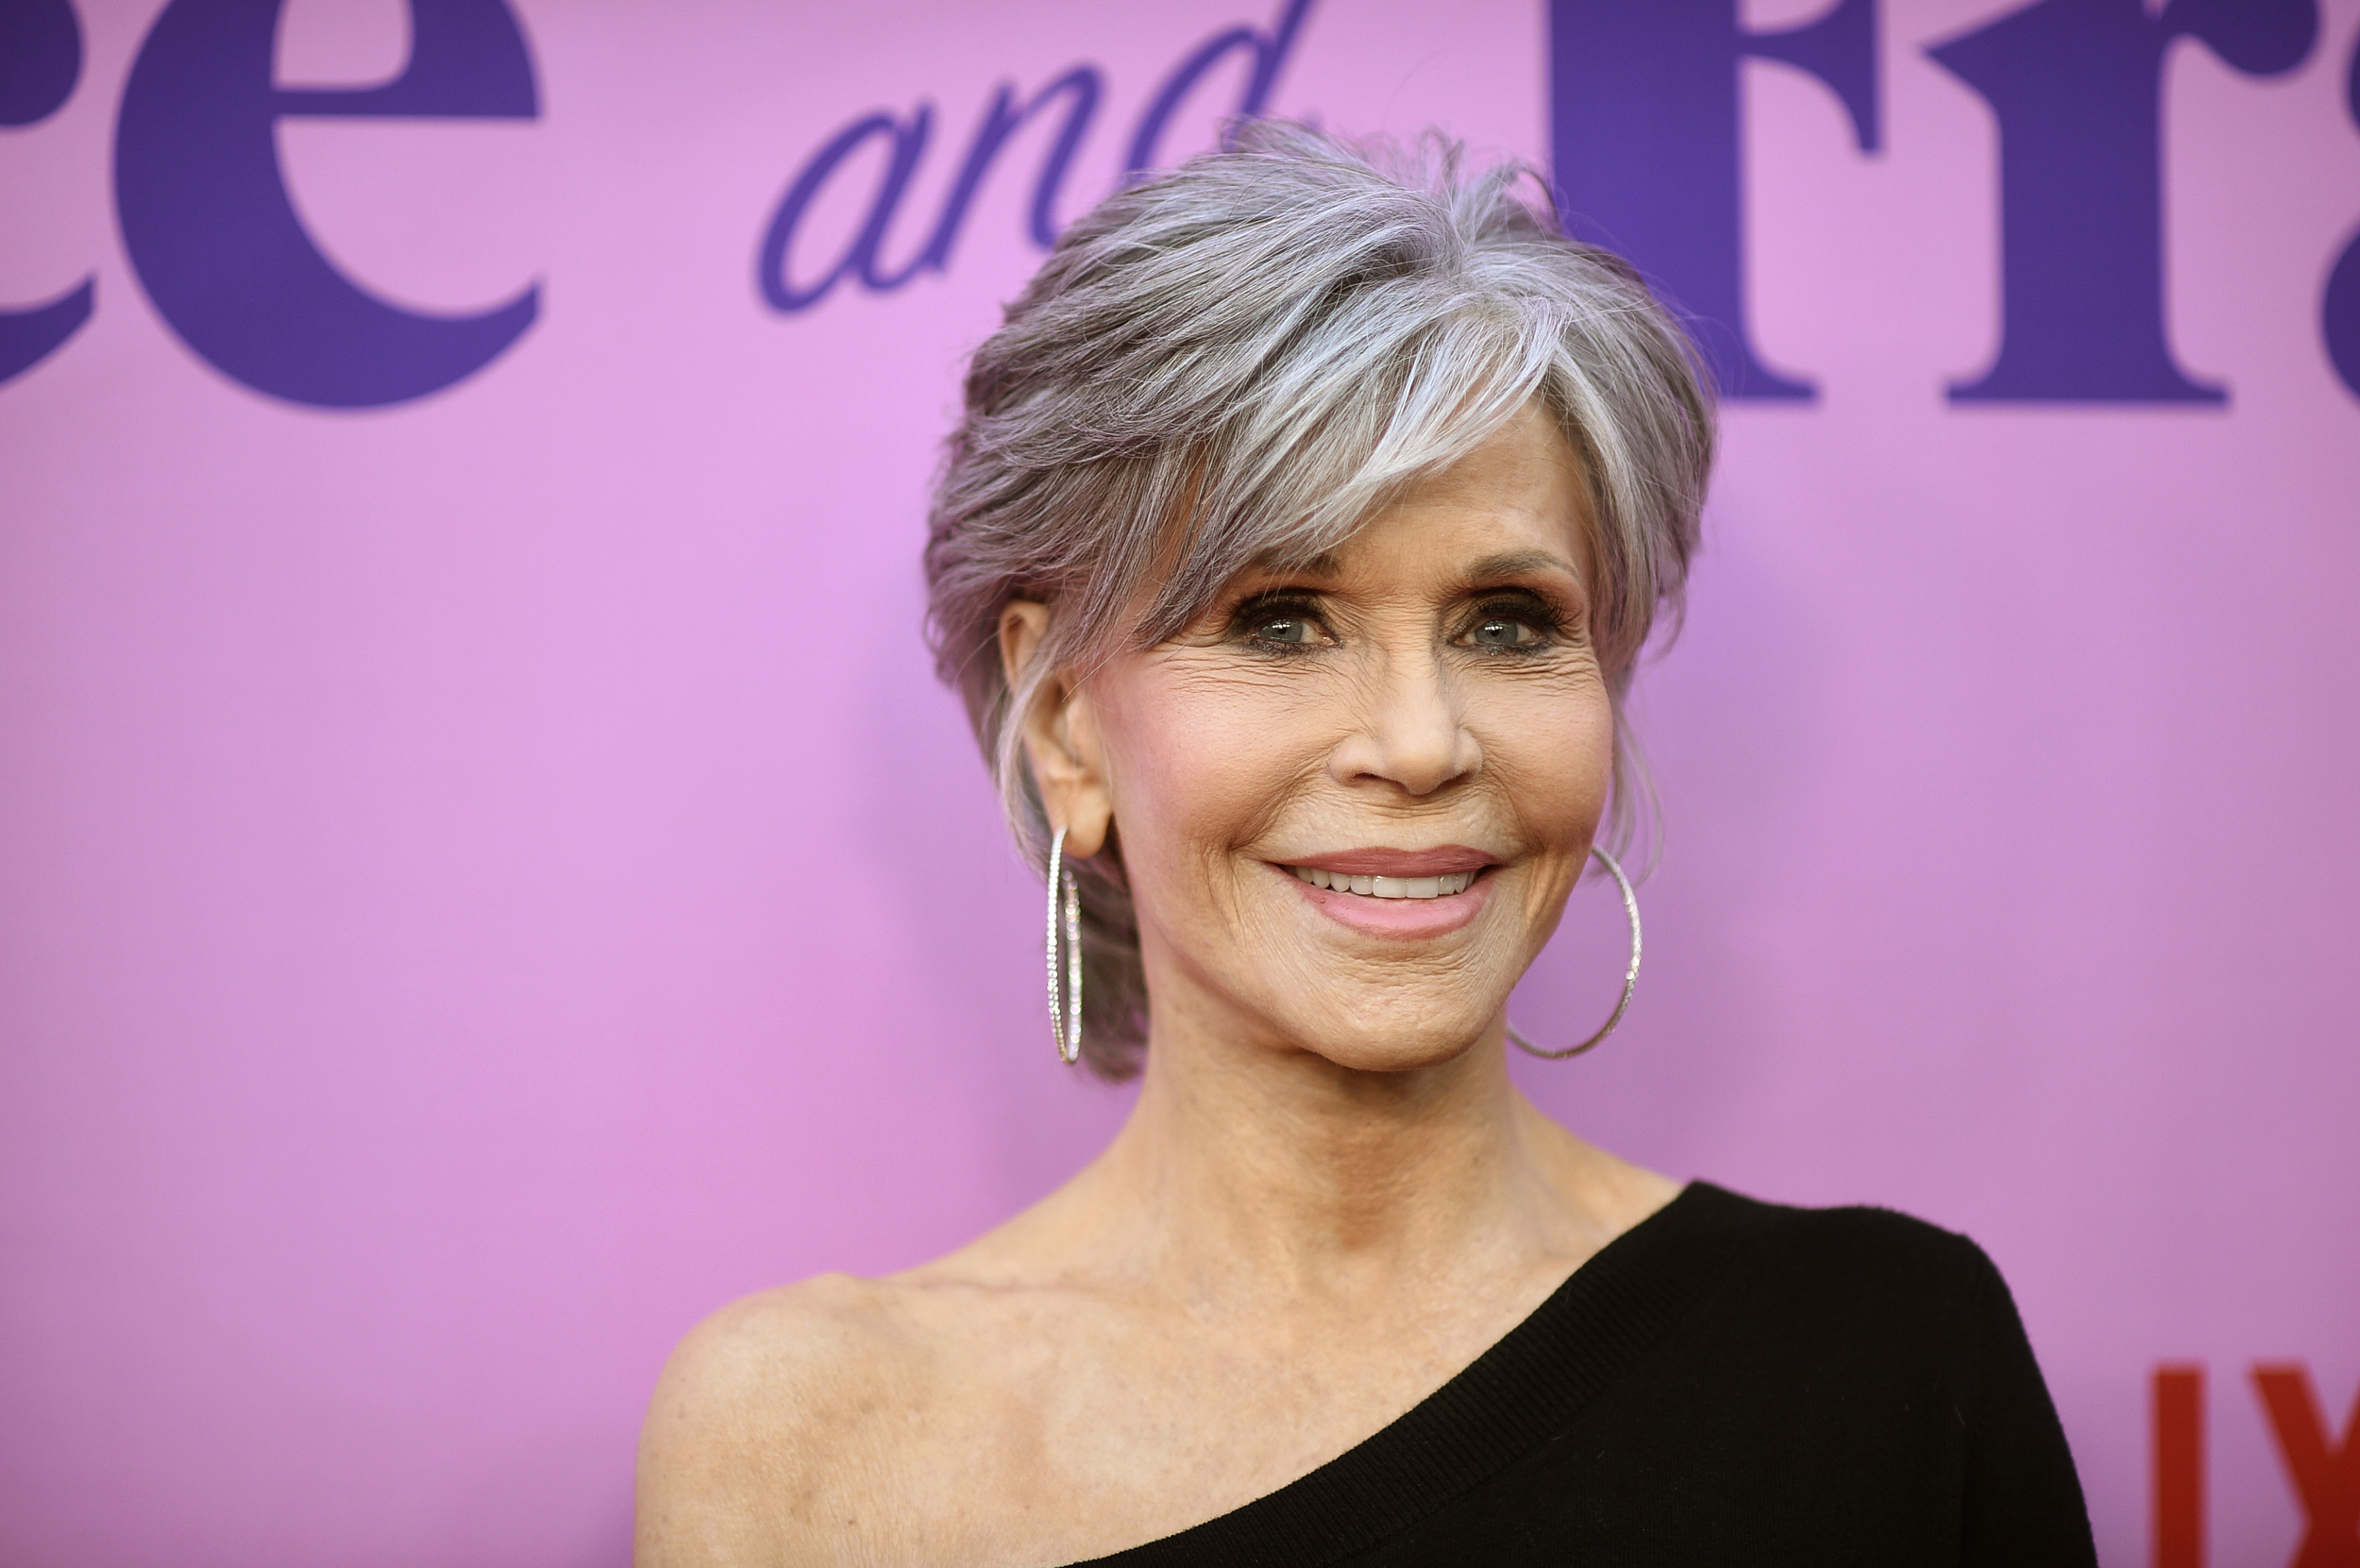 Jane Fonda, seen at an April appearance, said in an Instagram post that she has been diagnosed with non-Hodgkins lymphoma and has begun a six-month course of chemotherapy.